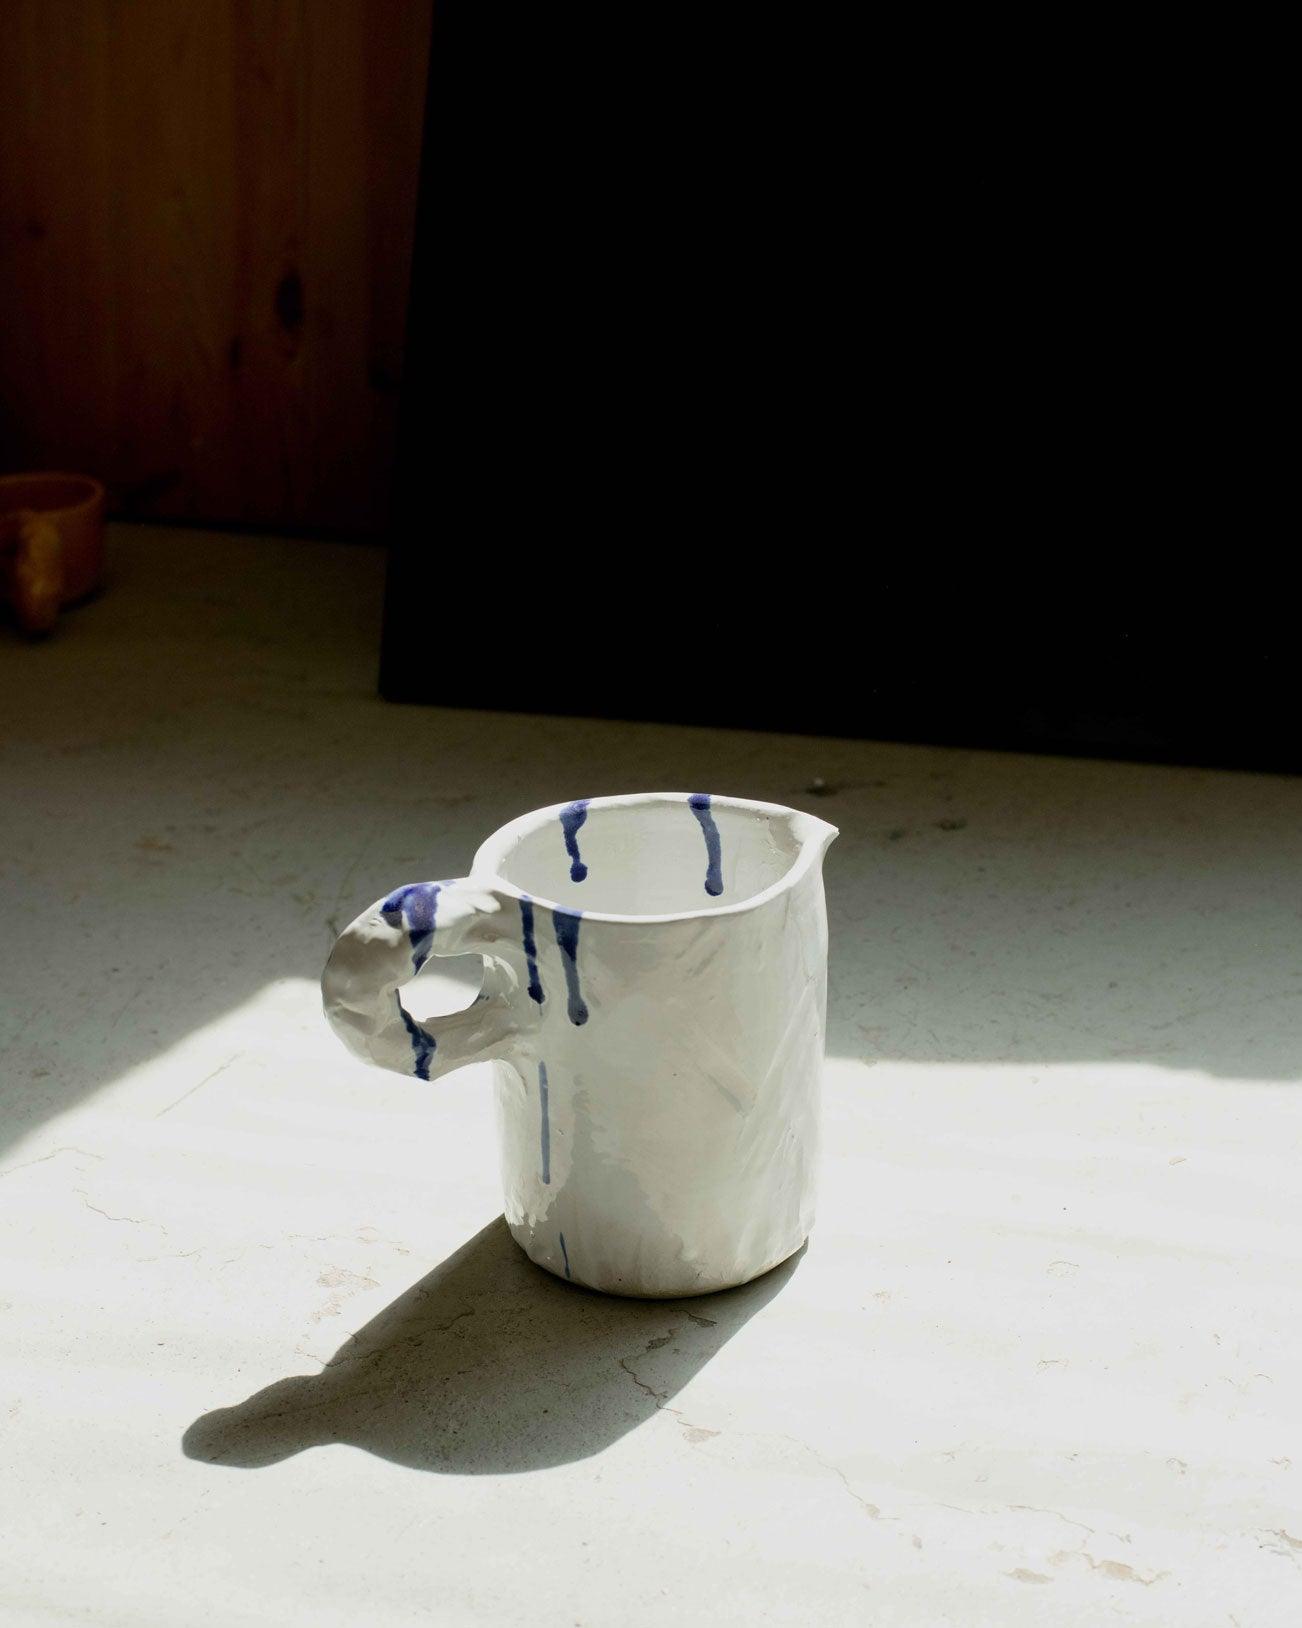 White modern ceramic pitcher with diagonal handle on a light reflexion background